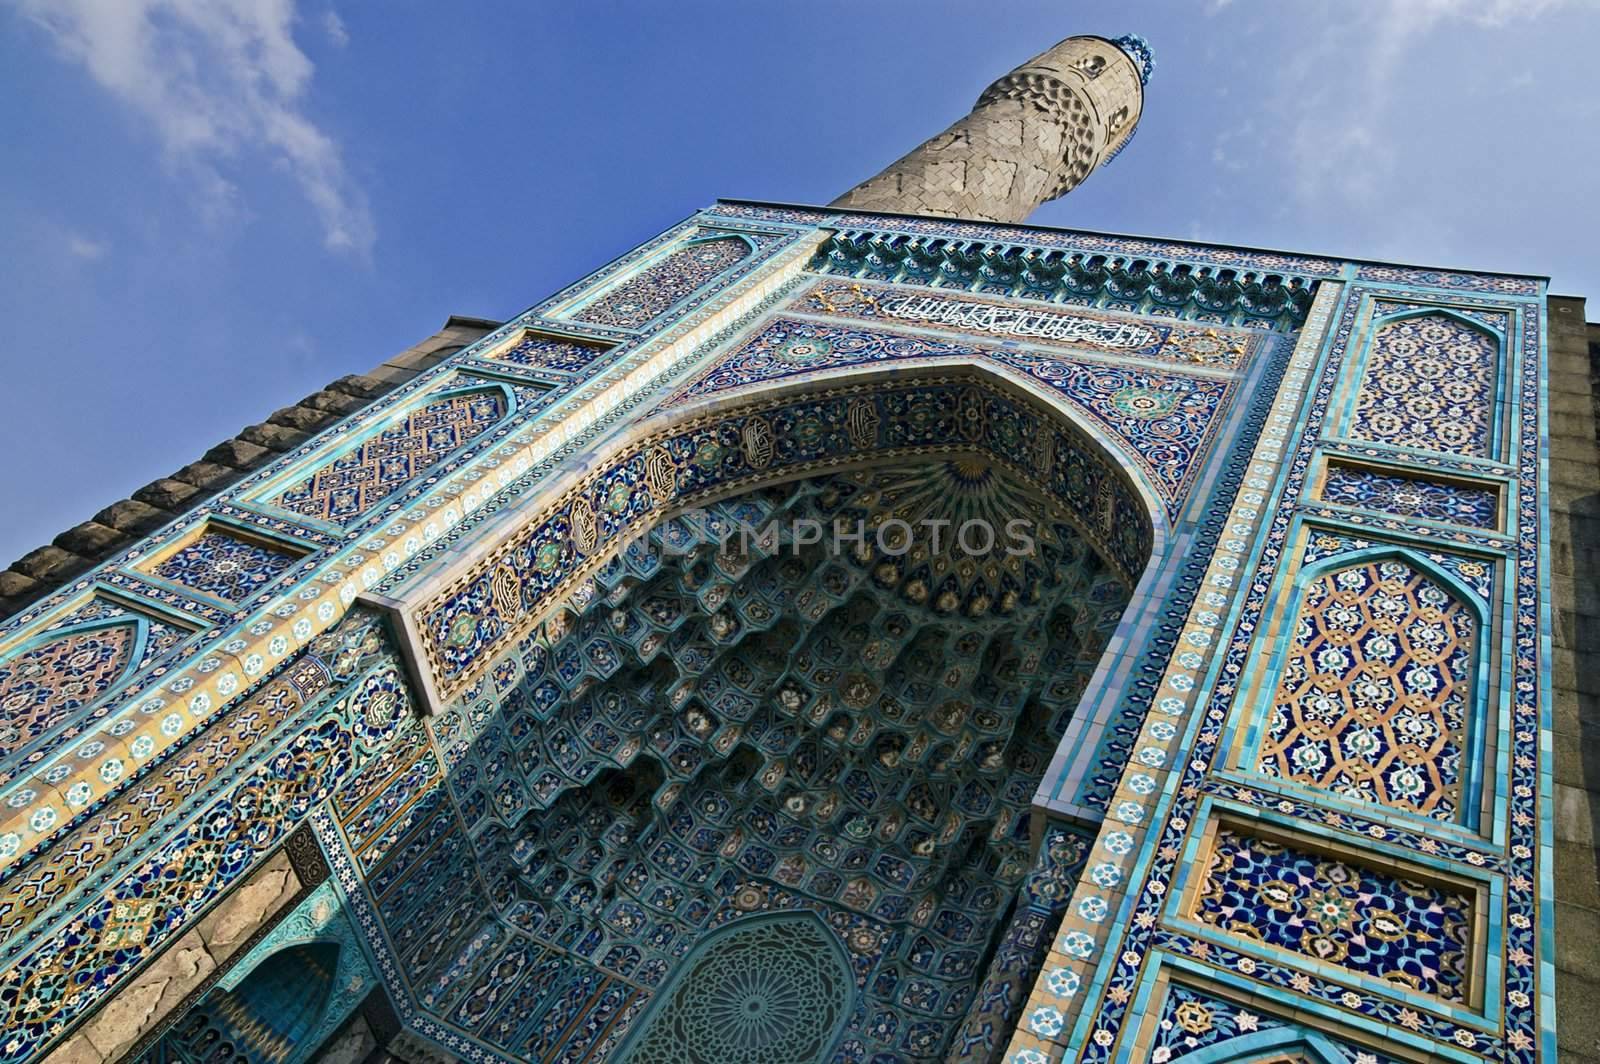 The minaret and the front wall with Arabic mosaics of the ancient mosque in Saint Petersburg, Russia.